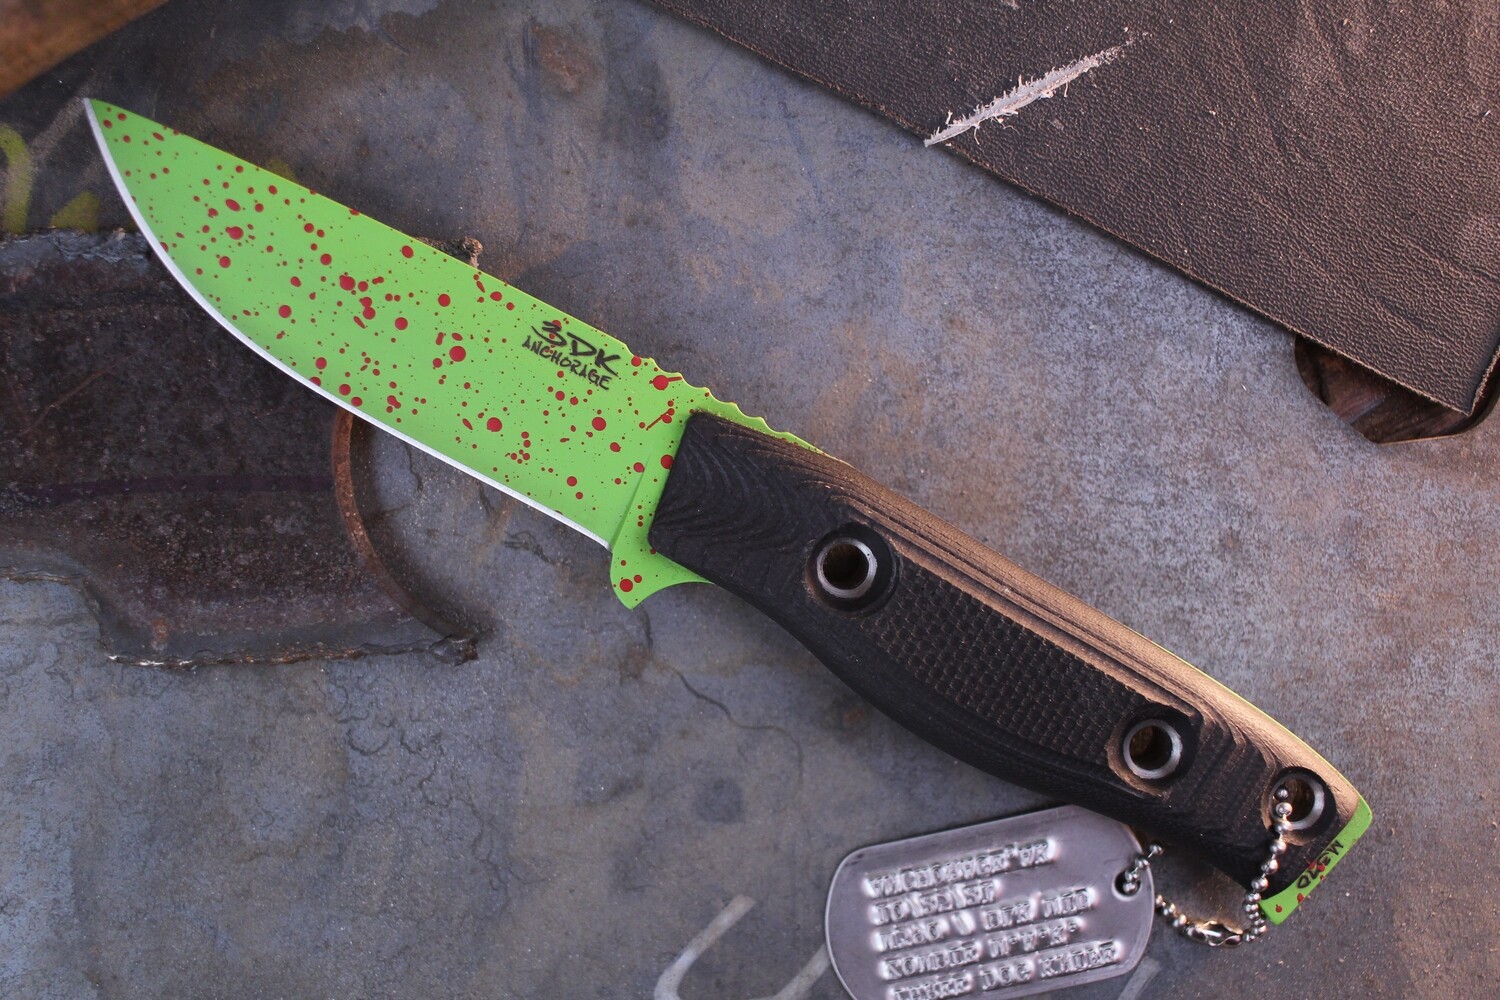 3DK "Because Zombies" MAK 4" Fixed Drop Point, Green With Red Splatter Cerakote M390 Blade / Black G10 Handle